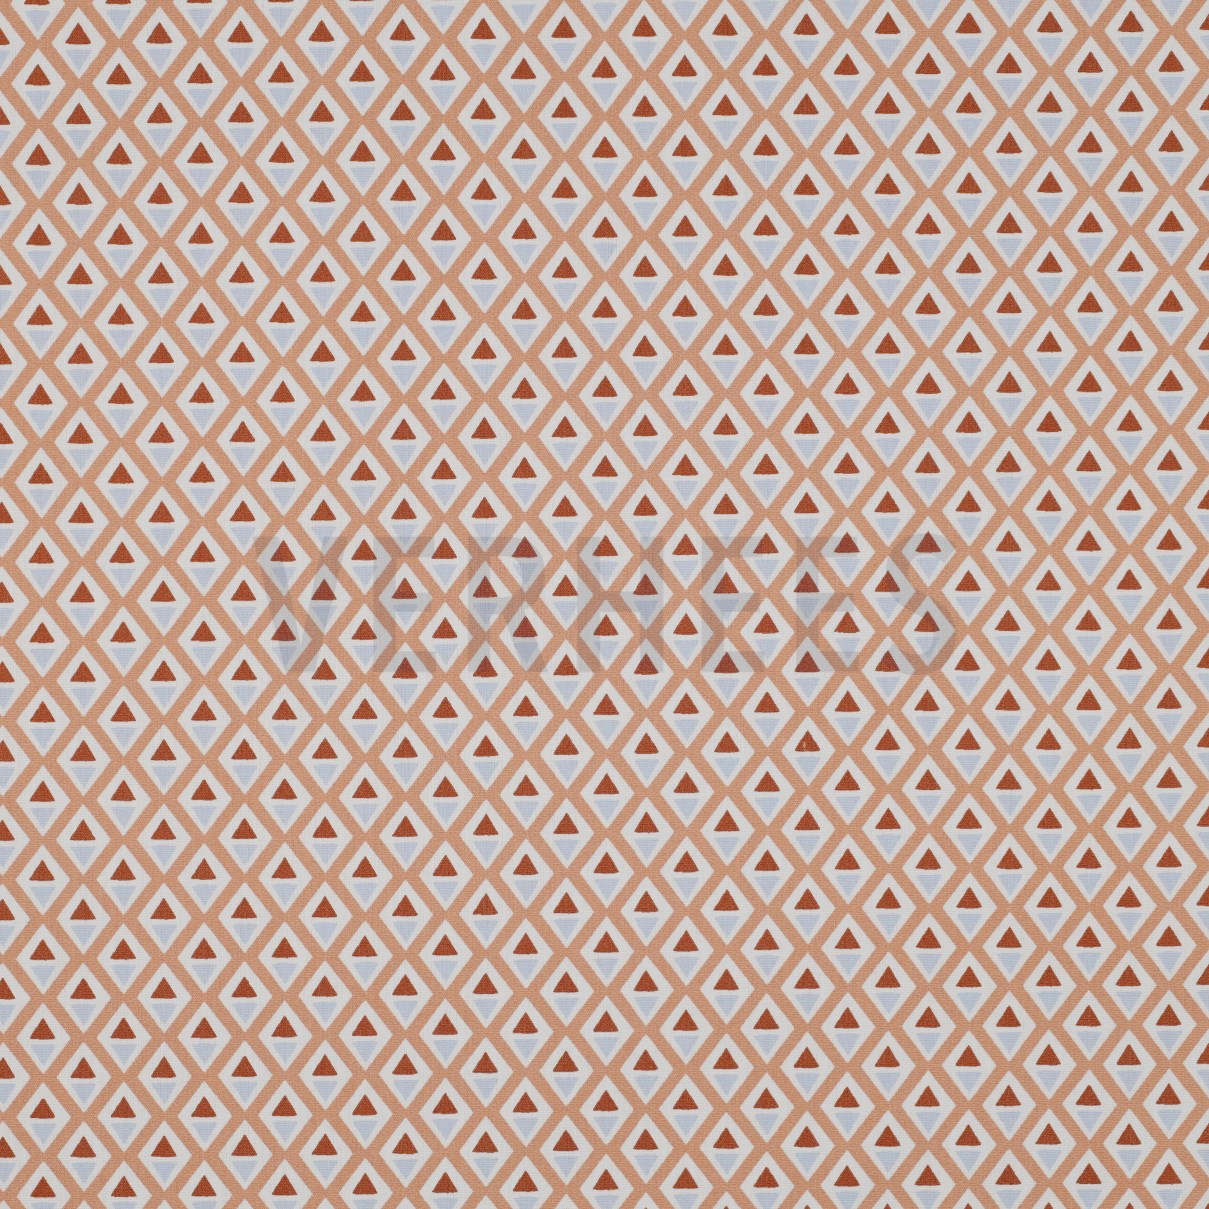 COATED COTTON ABSTRACT LIGHT APRICOT (high resolution)